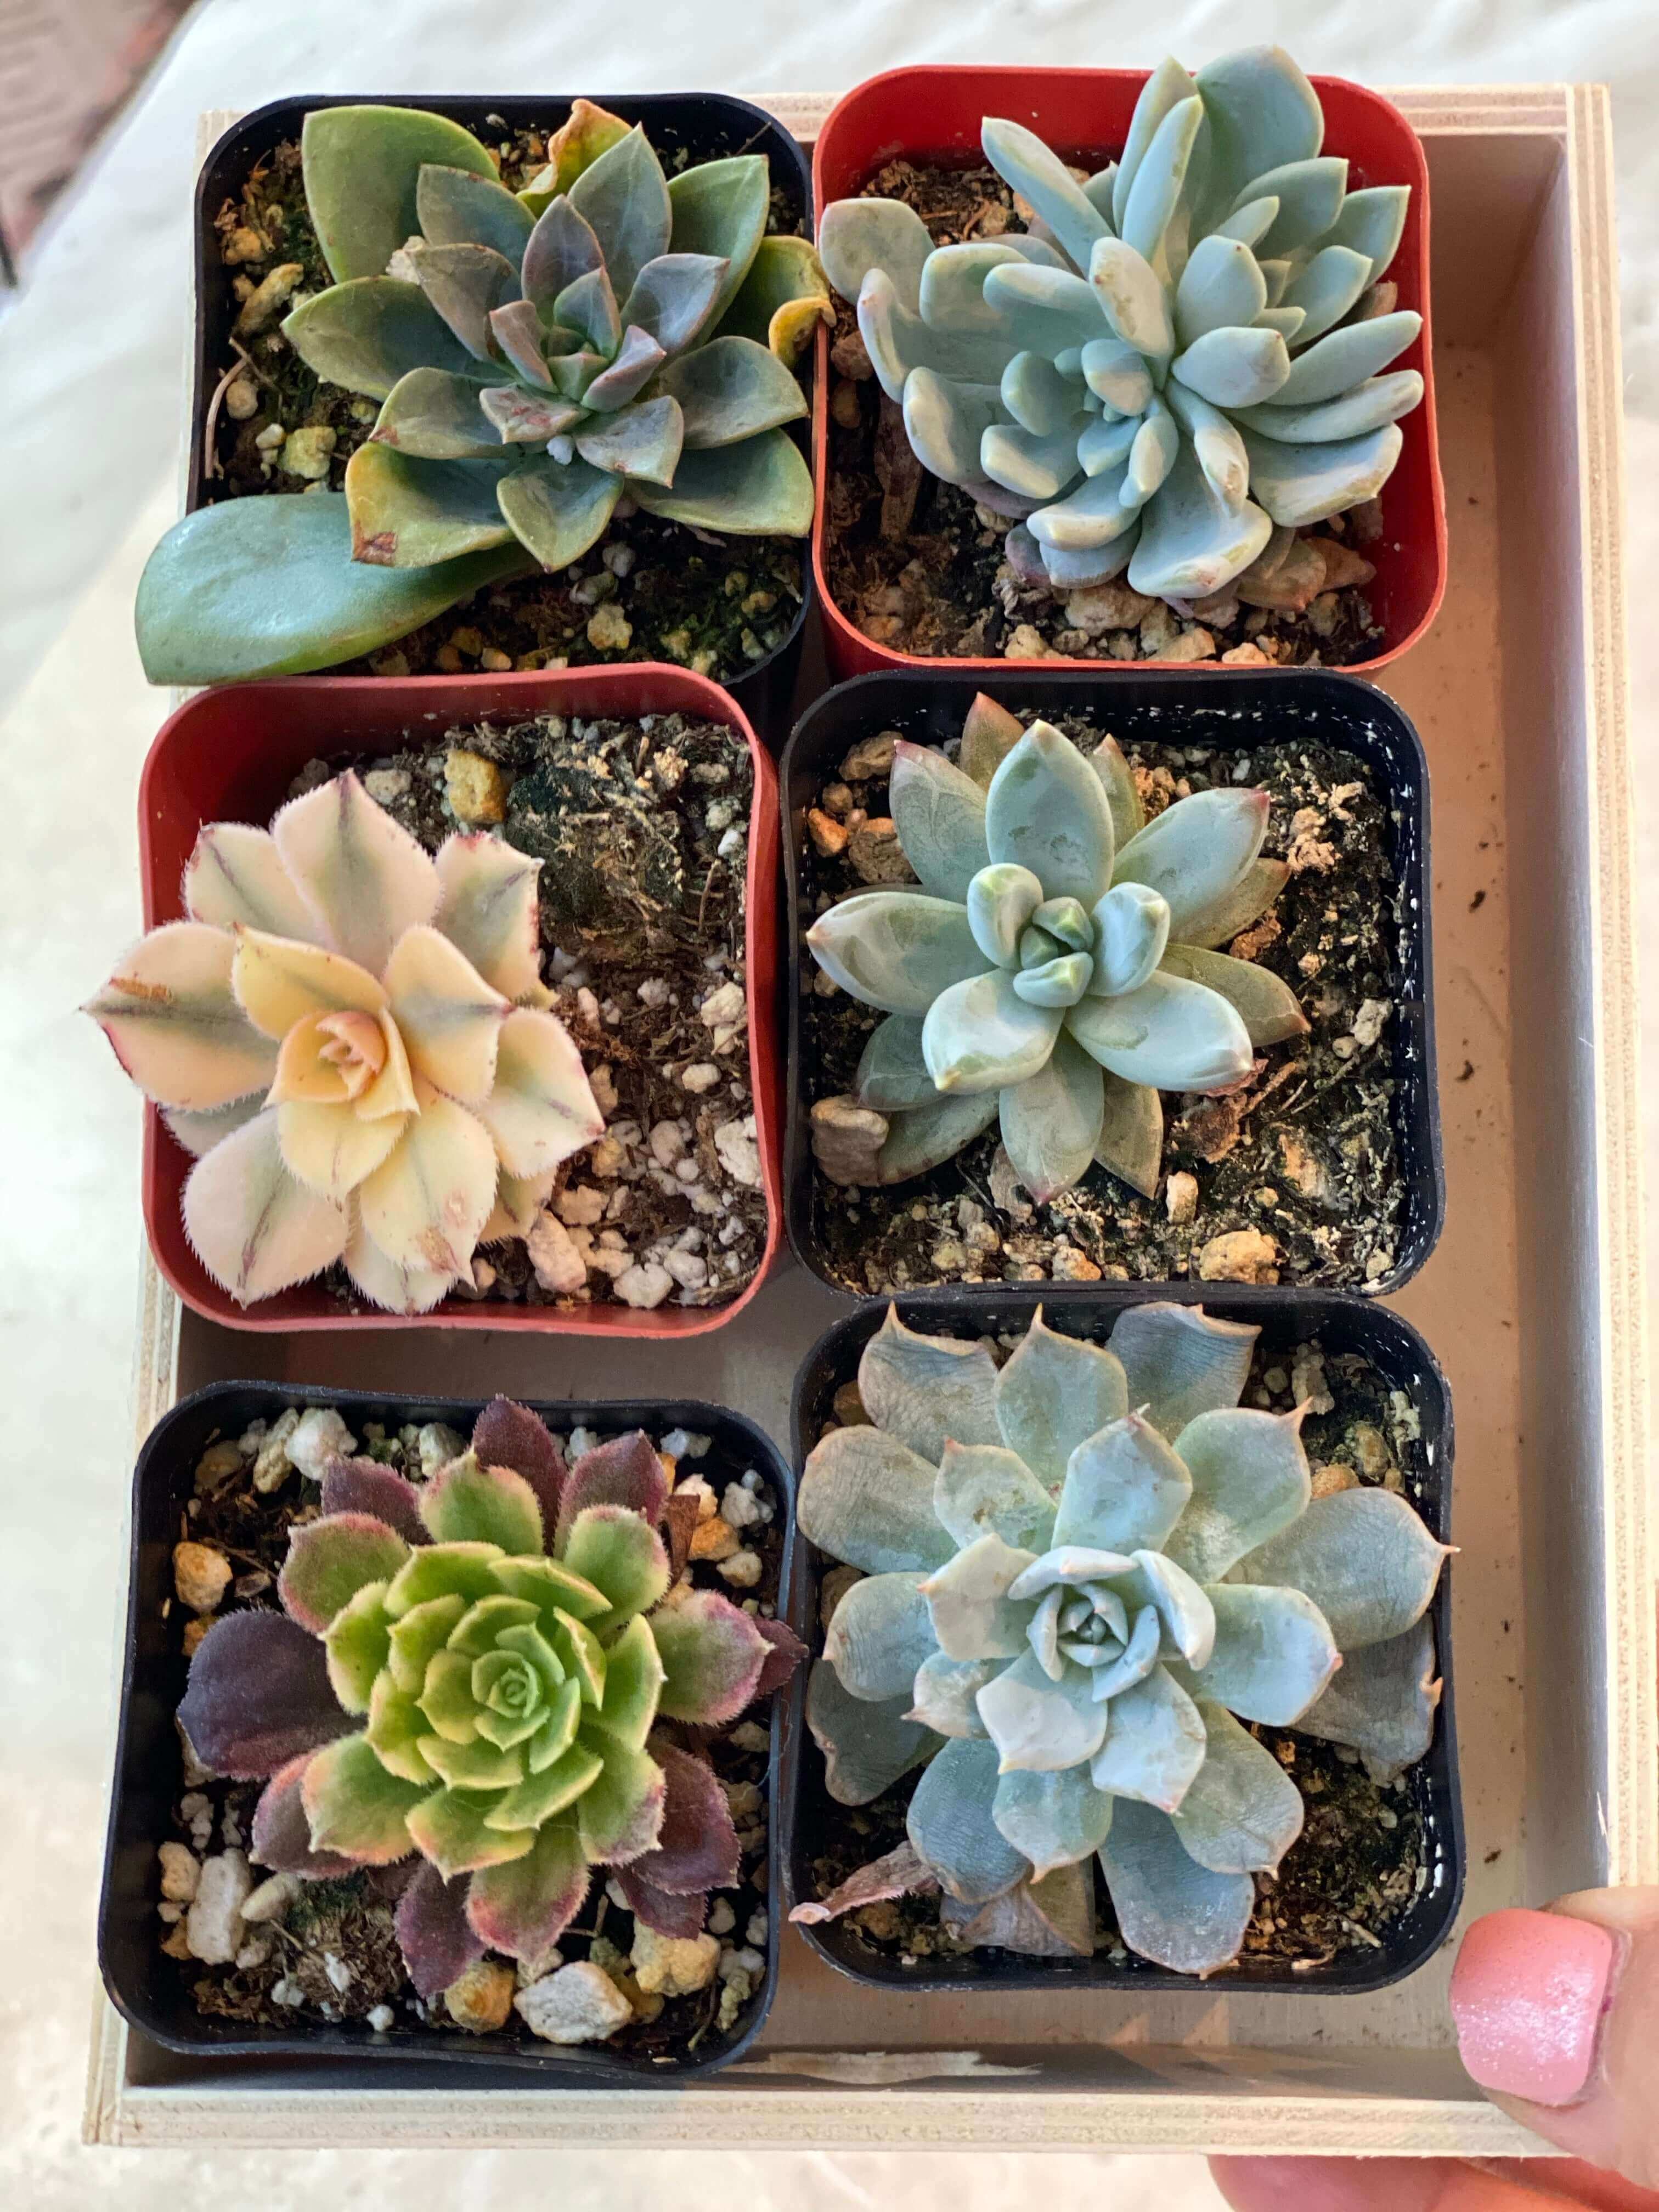 Group of six small, vibrant succulents, each plant showcasing its own unique characteristics.